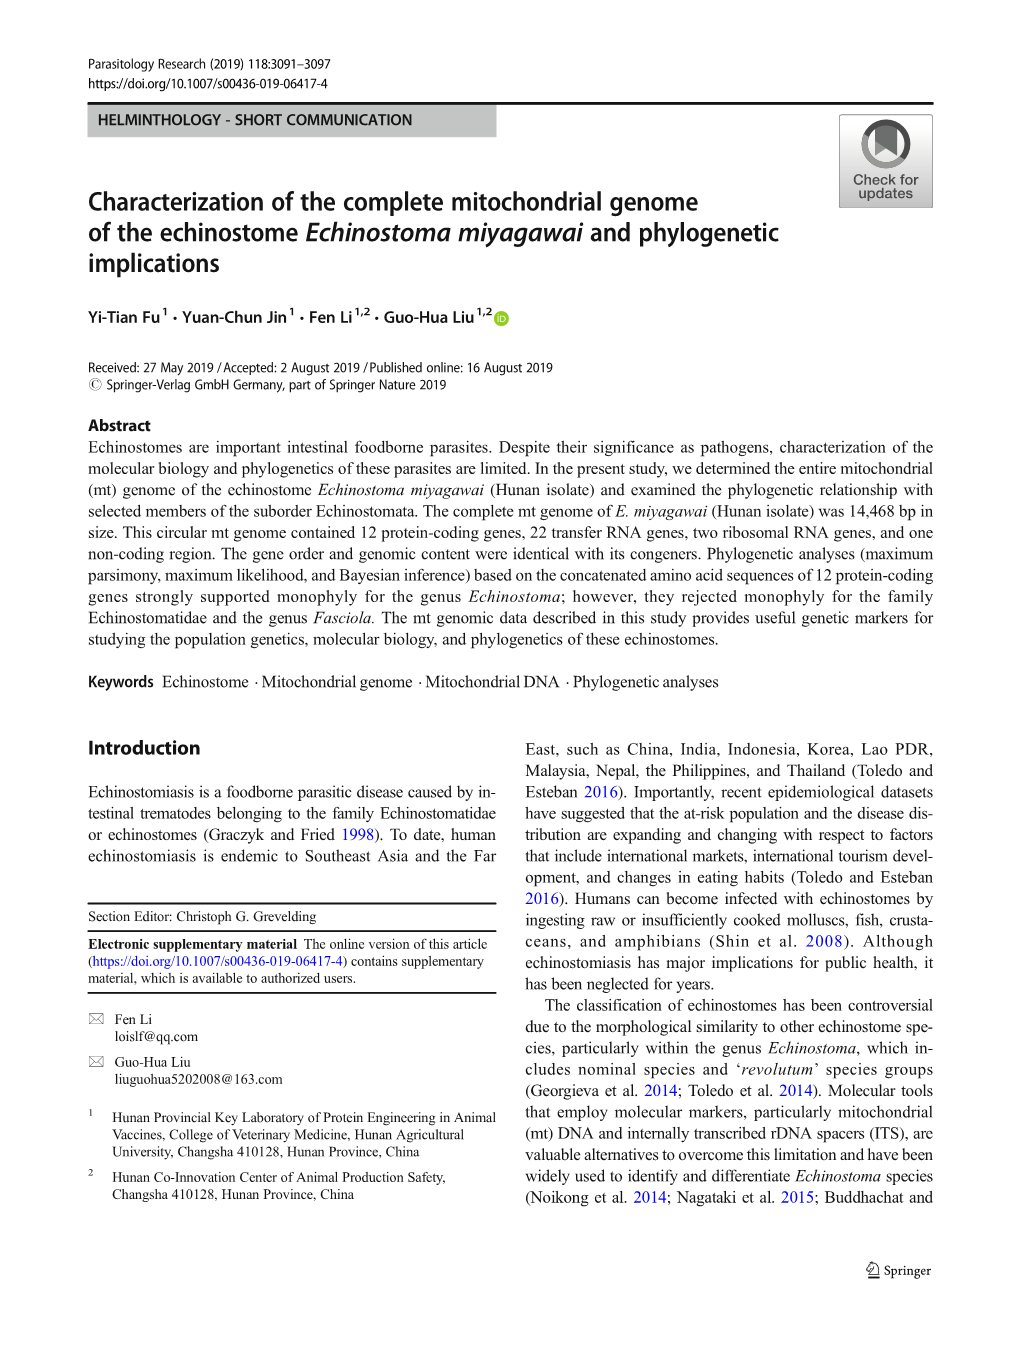 Characterization of the Complete Mitochondrial Genome of the Echinostome Echinostoma Miyagawai and Phylogenetic Implications